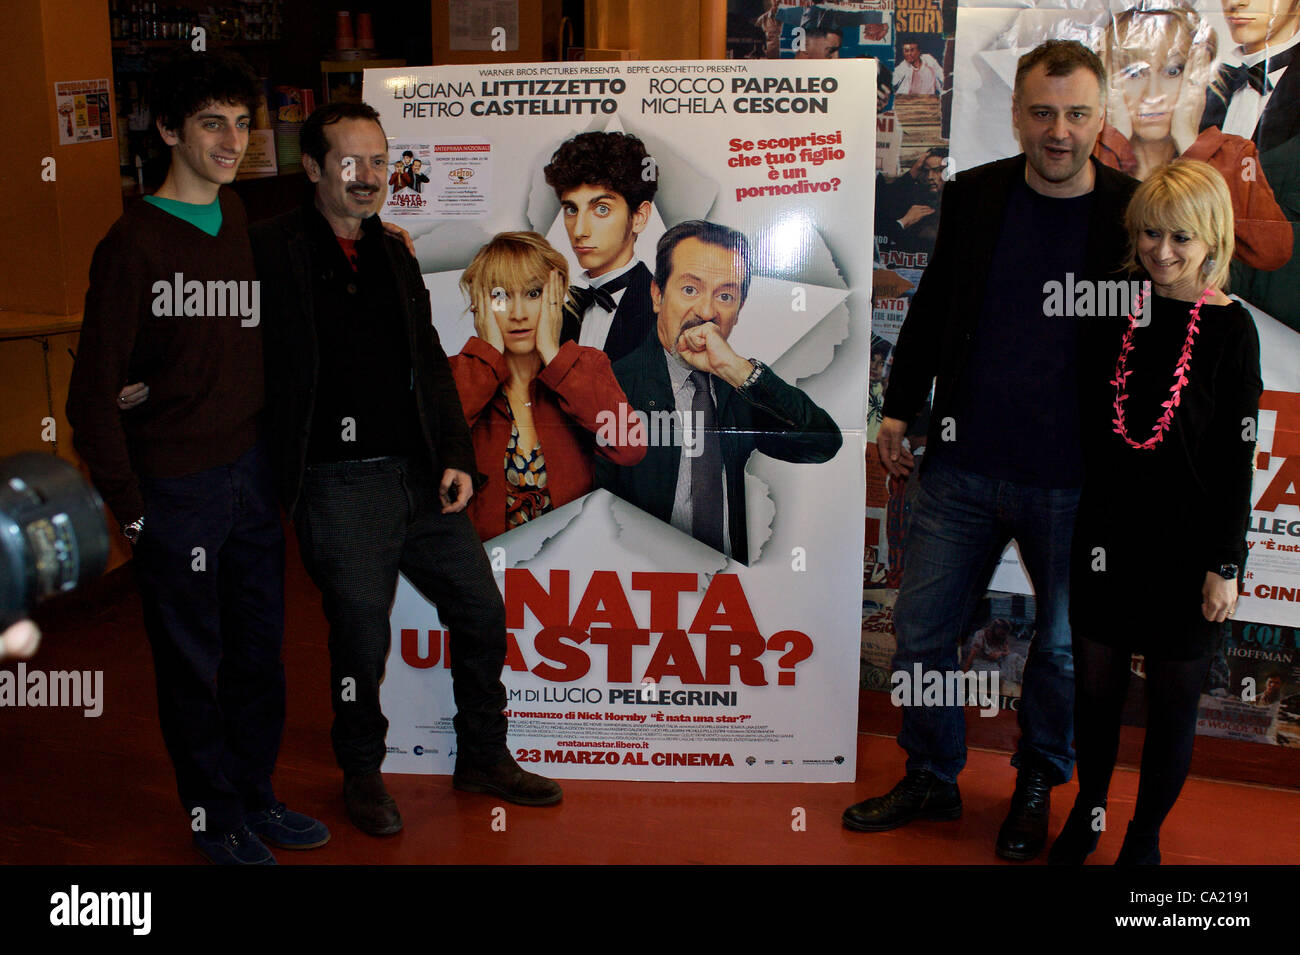 BOLOGNA, ITALY - MAR 22: [LtoR] Castellitto, Papaleo, Pellegrini, Littizzetto,in front of the banner of the new Movie 'A Star is Born' in Bologna, Italy on May 9, 2011. Stock Photo